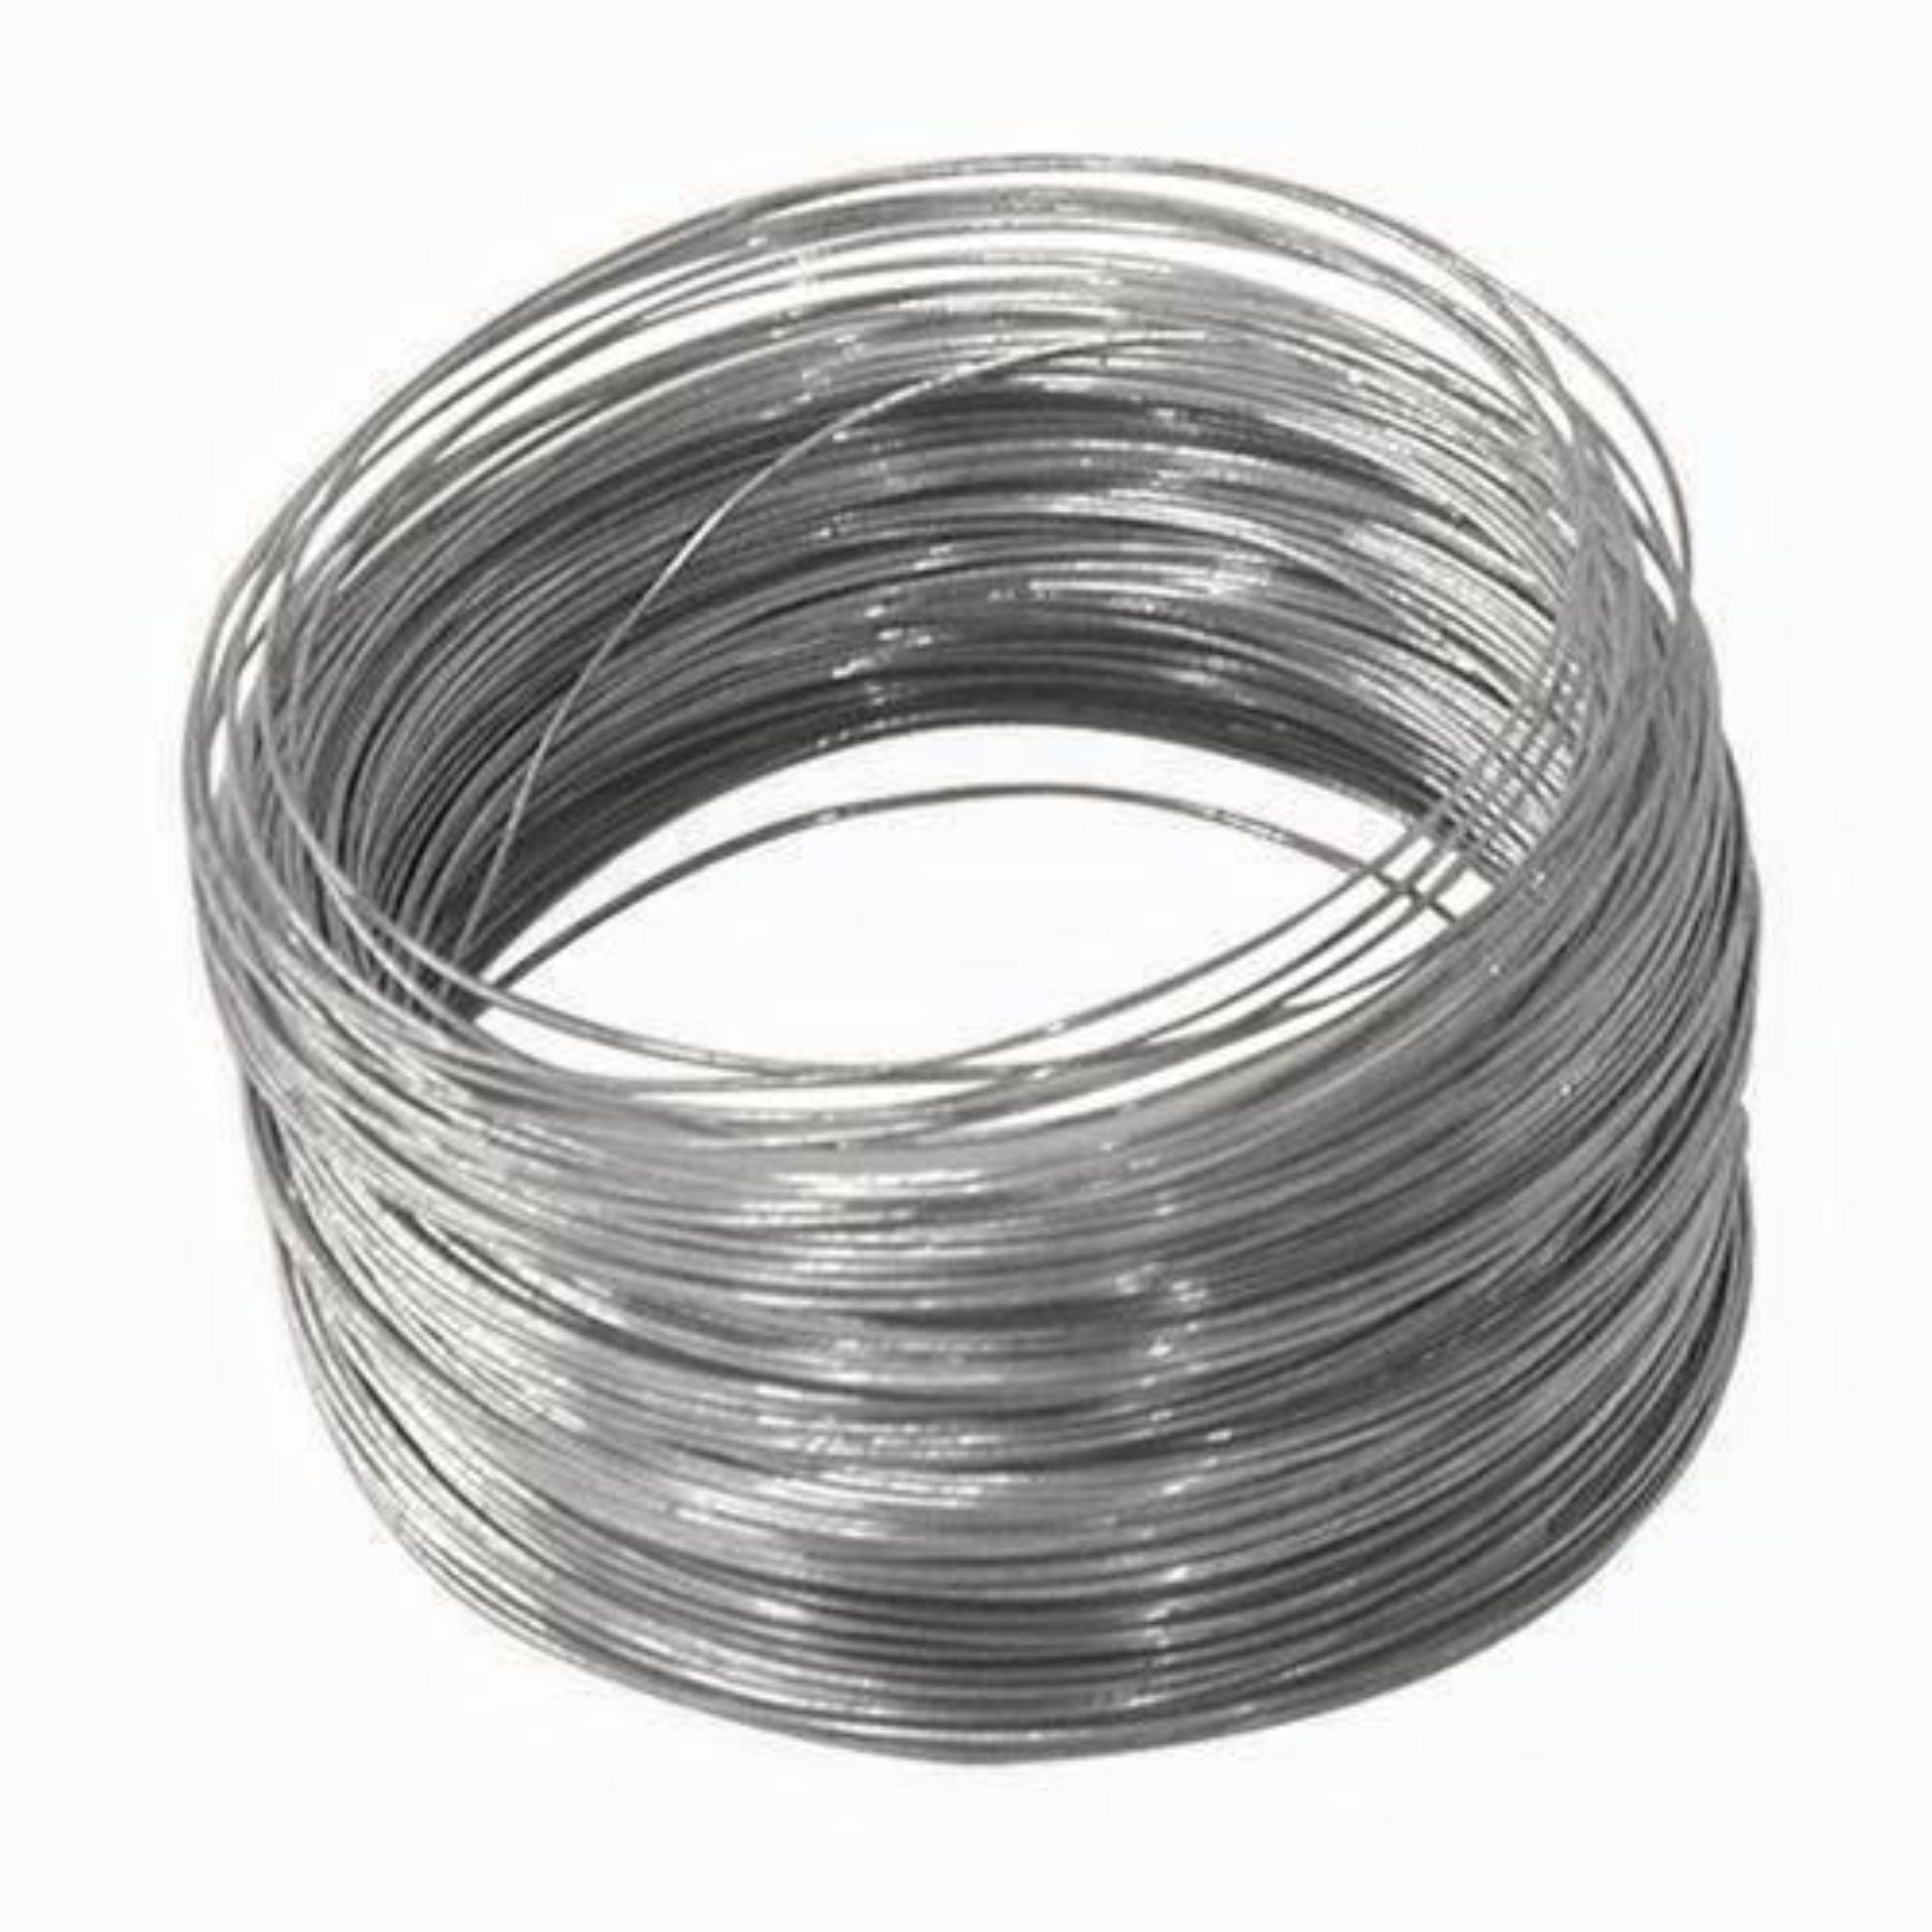 inconel-wires-manufacturers-suppliers-stockists-exporters